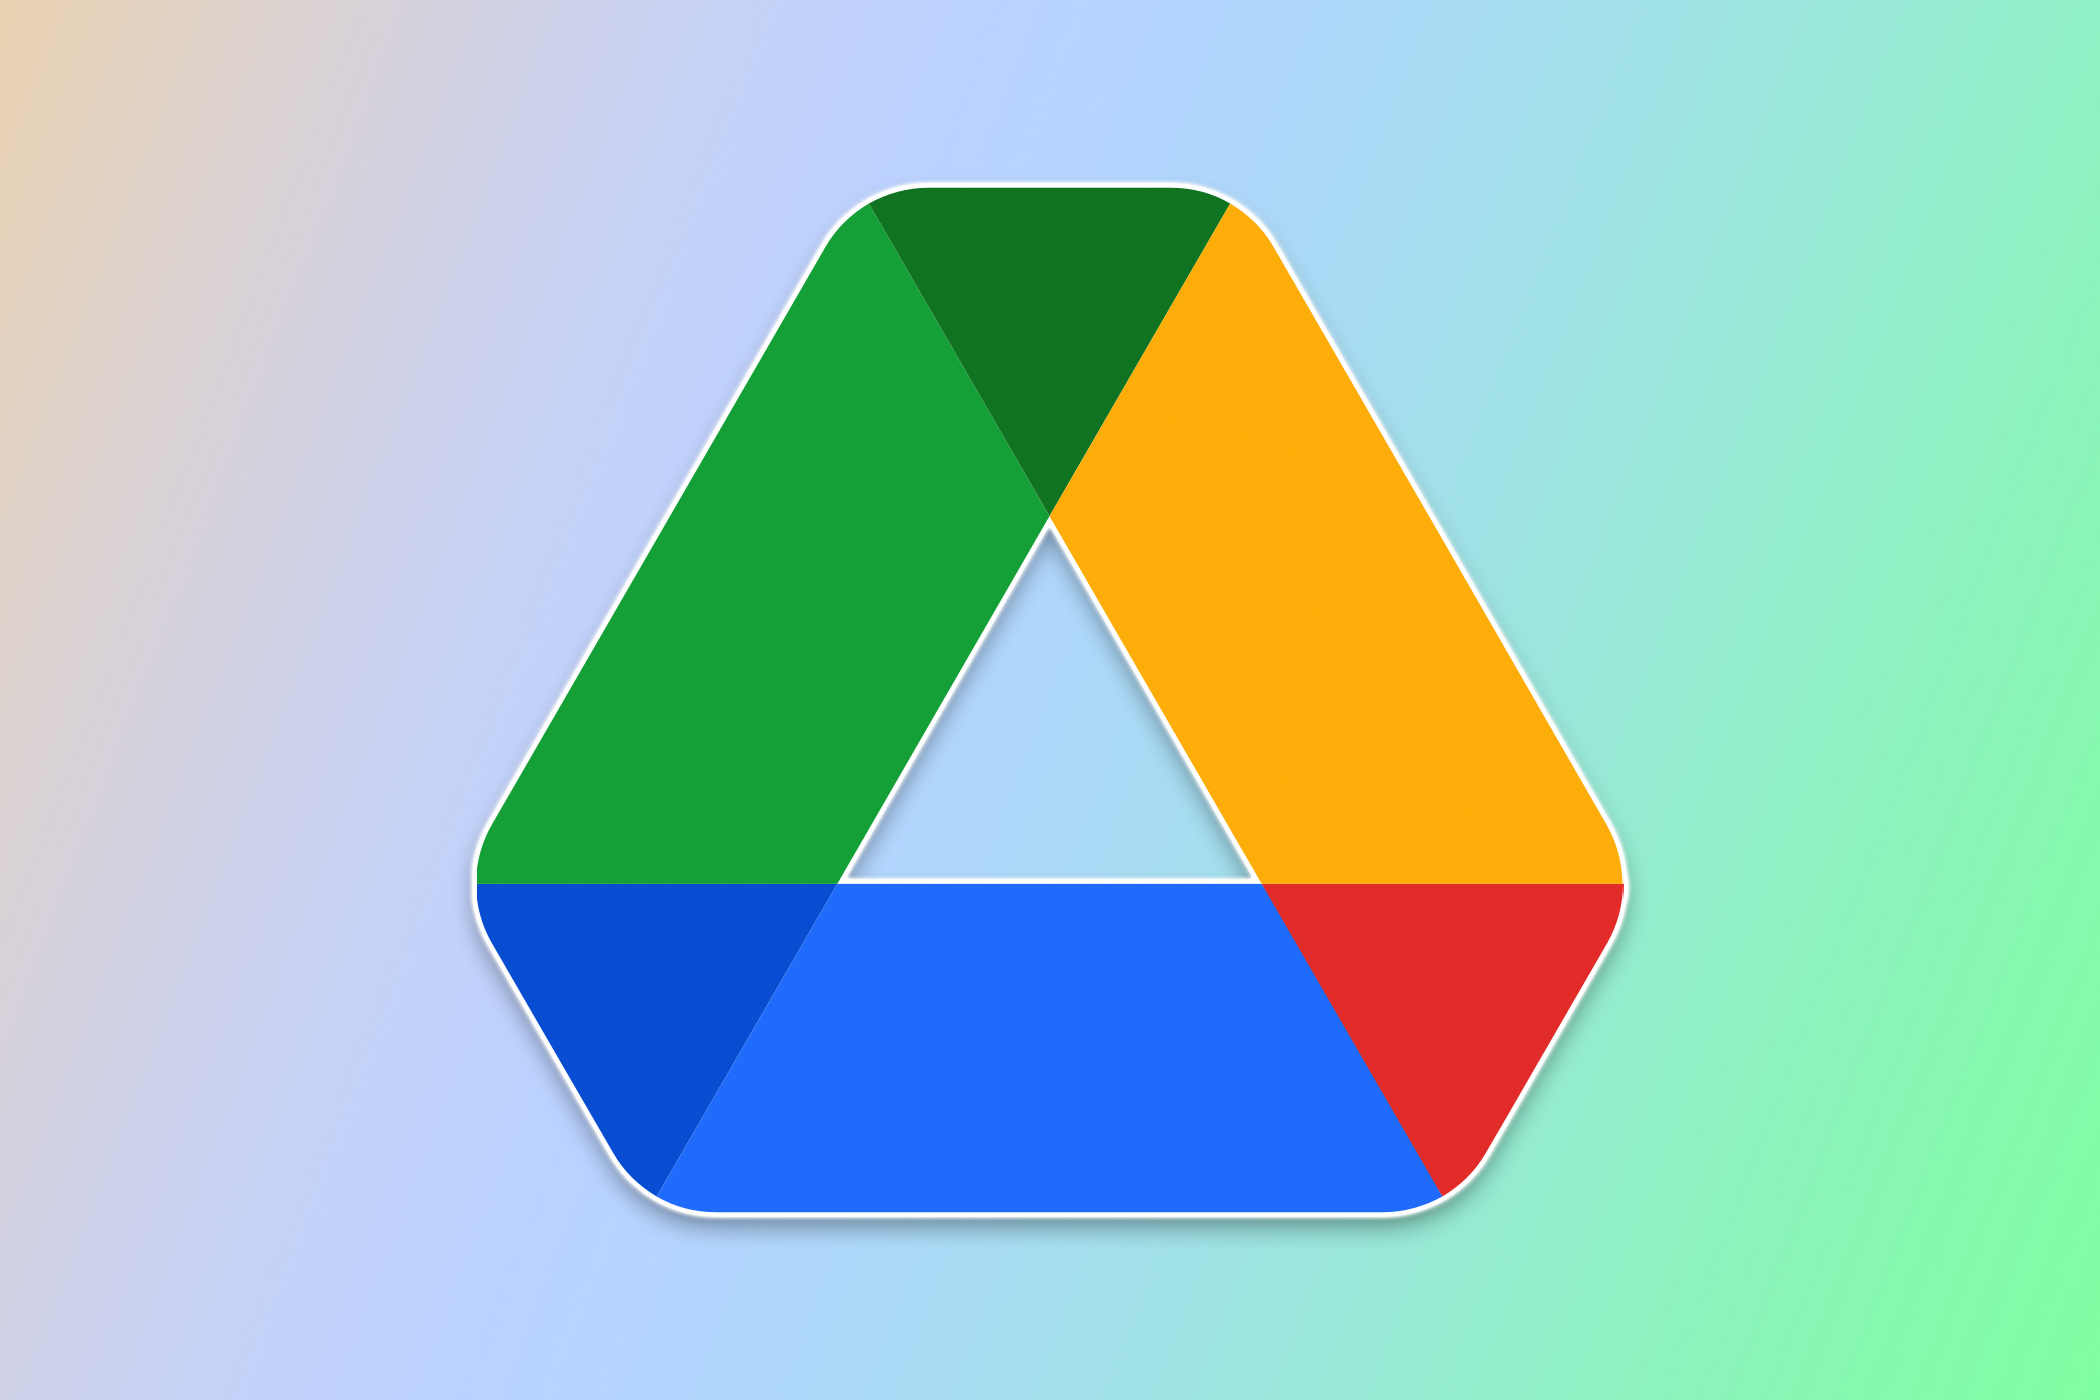 The Google Drive logo on a colorful background.